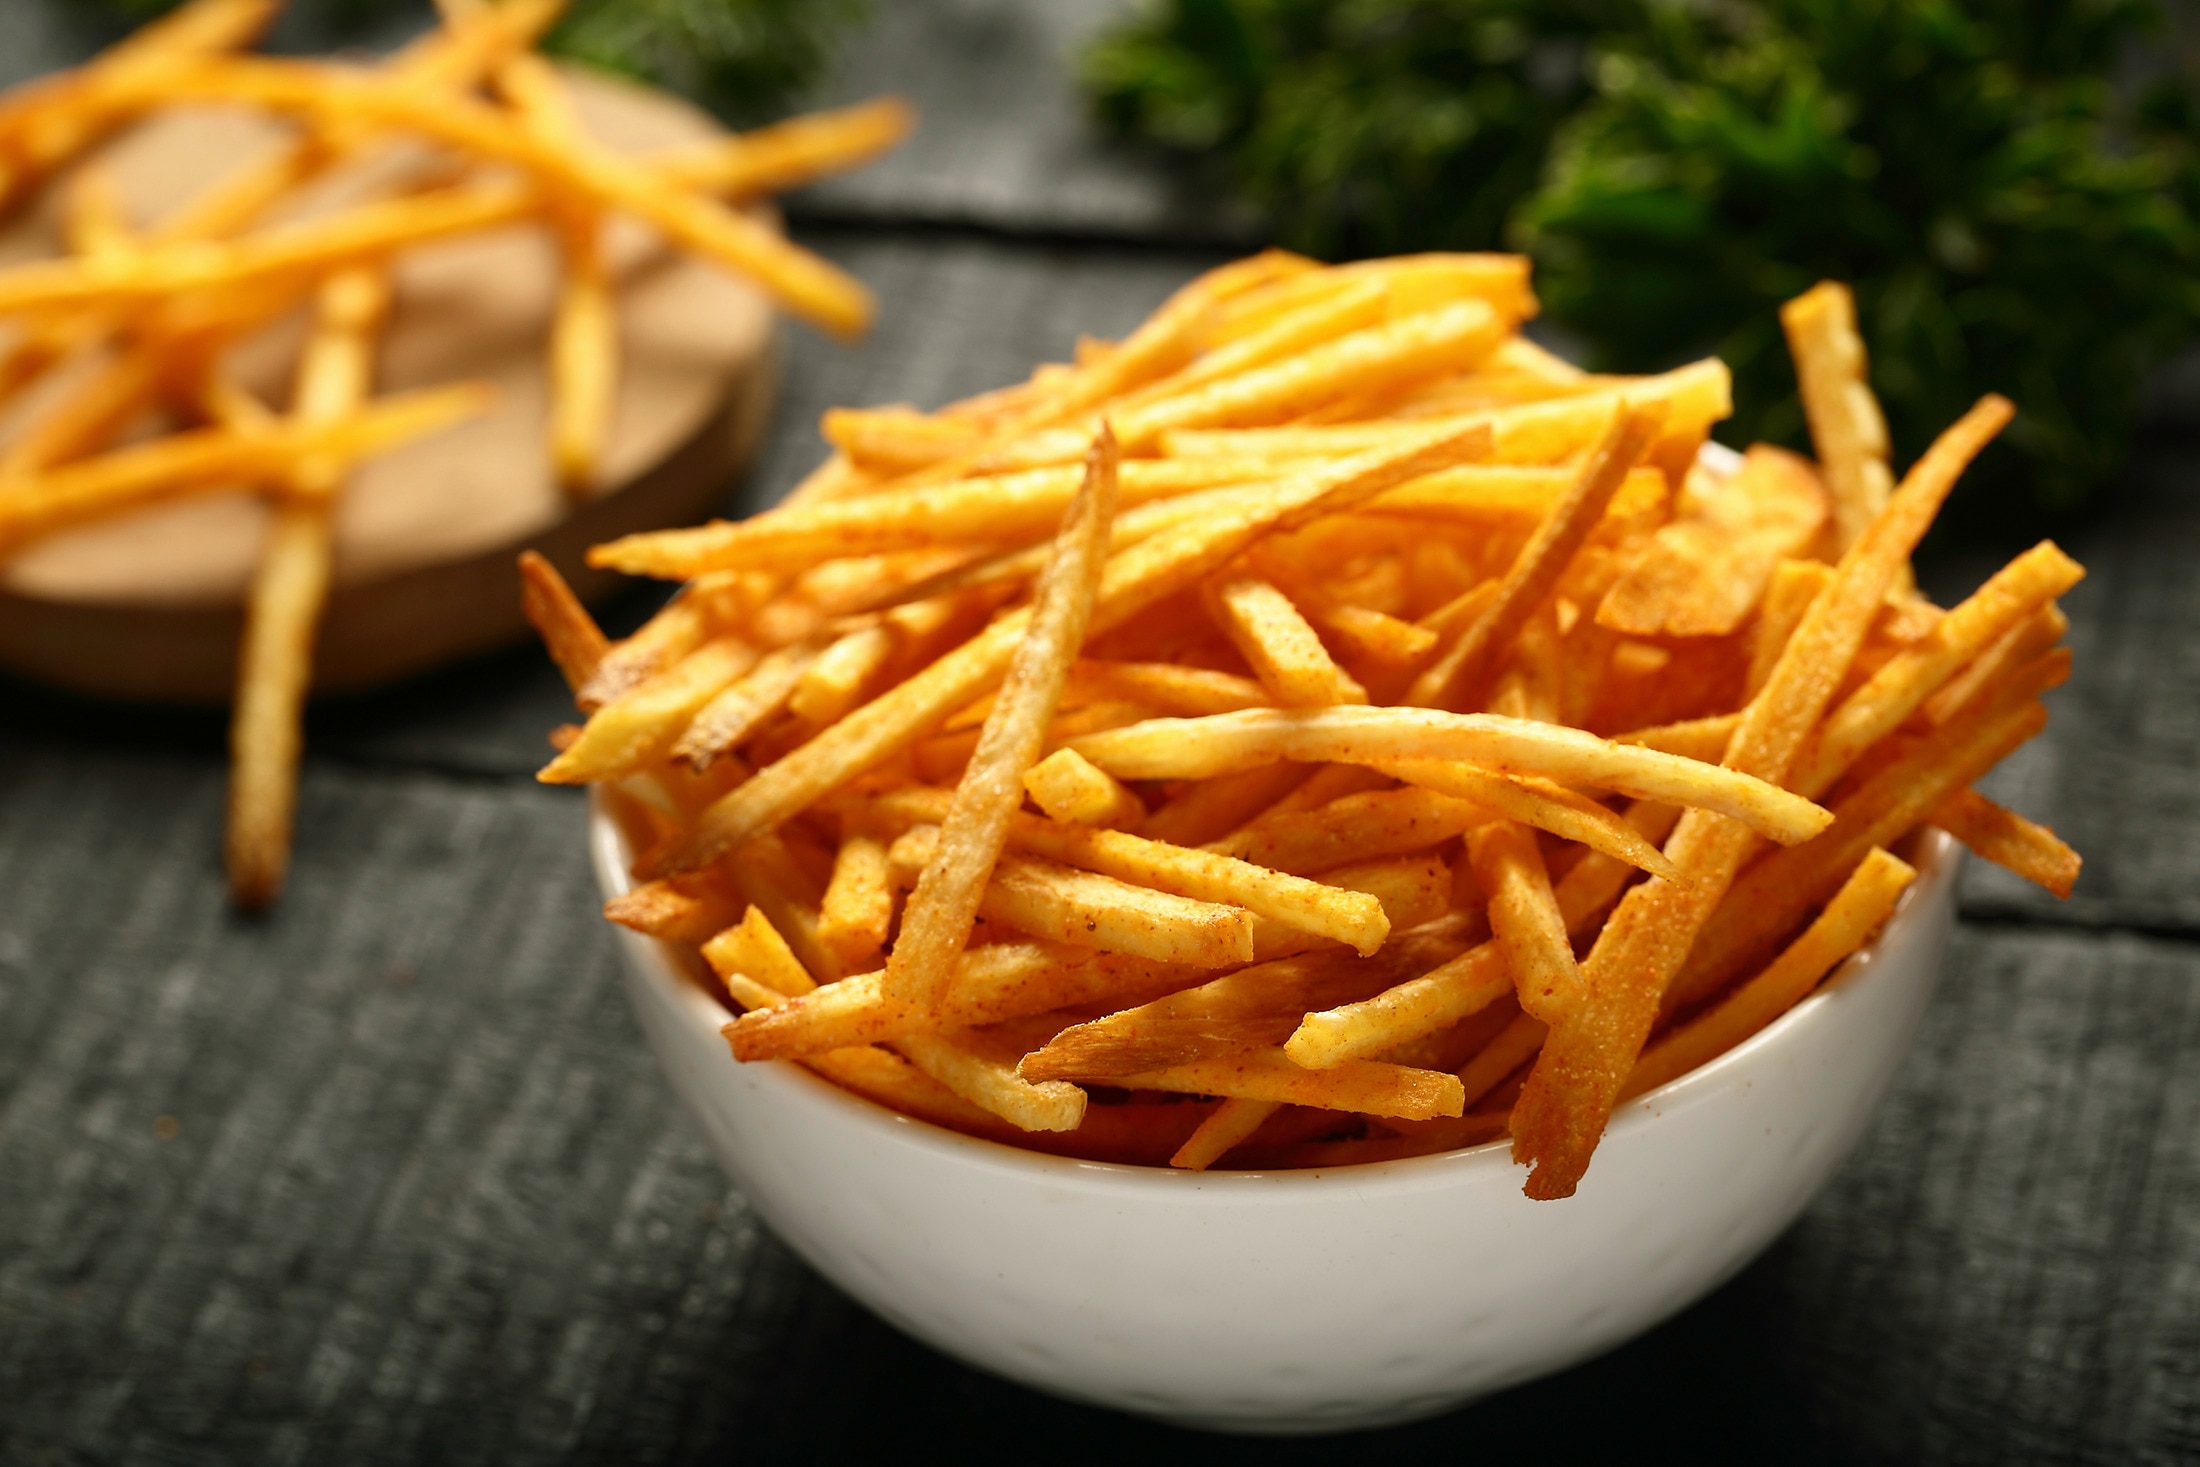 A bowl of freshly cooked and seasoned fries